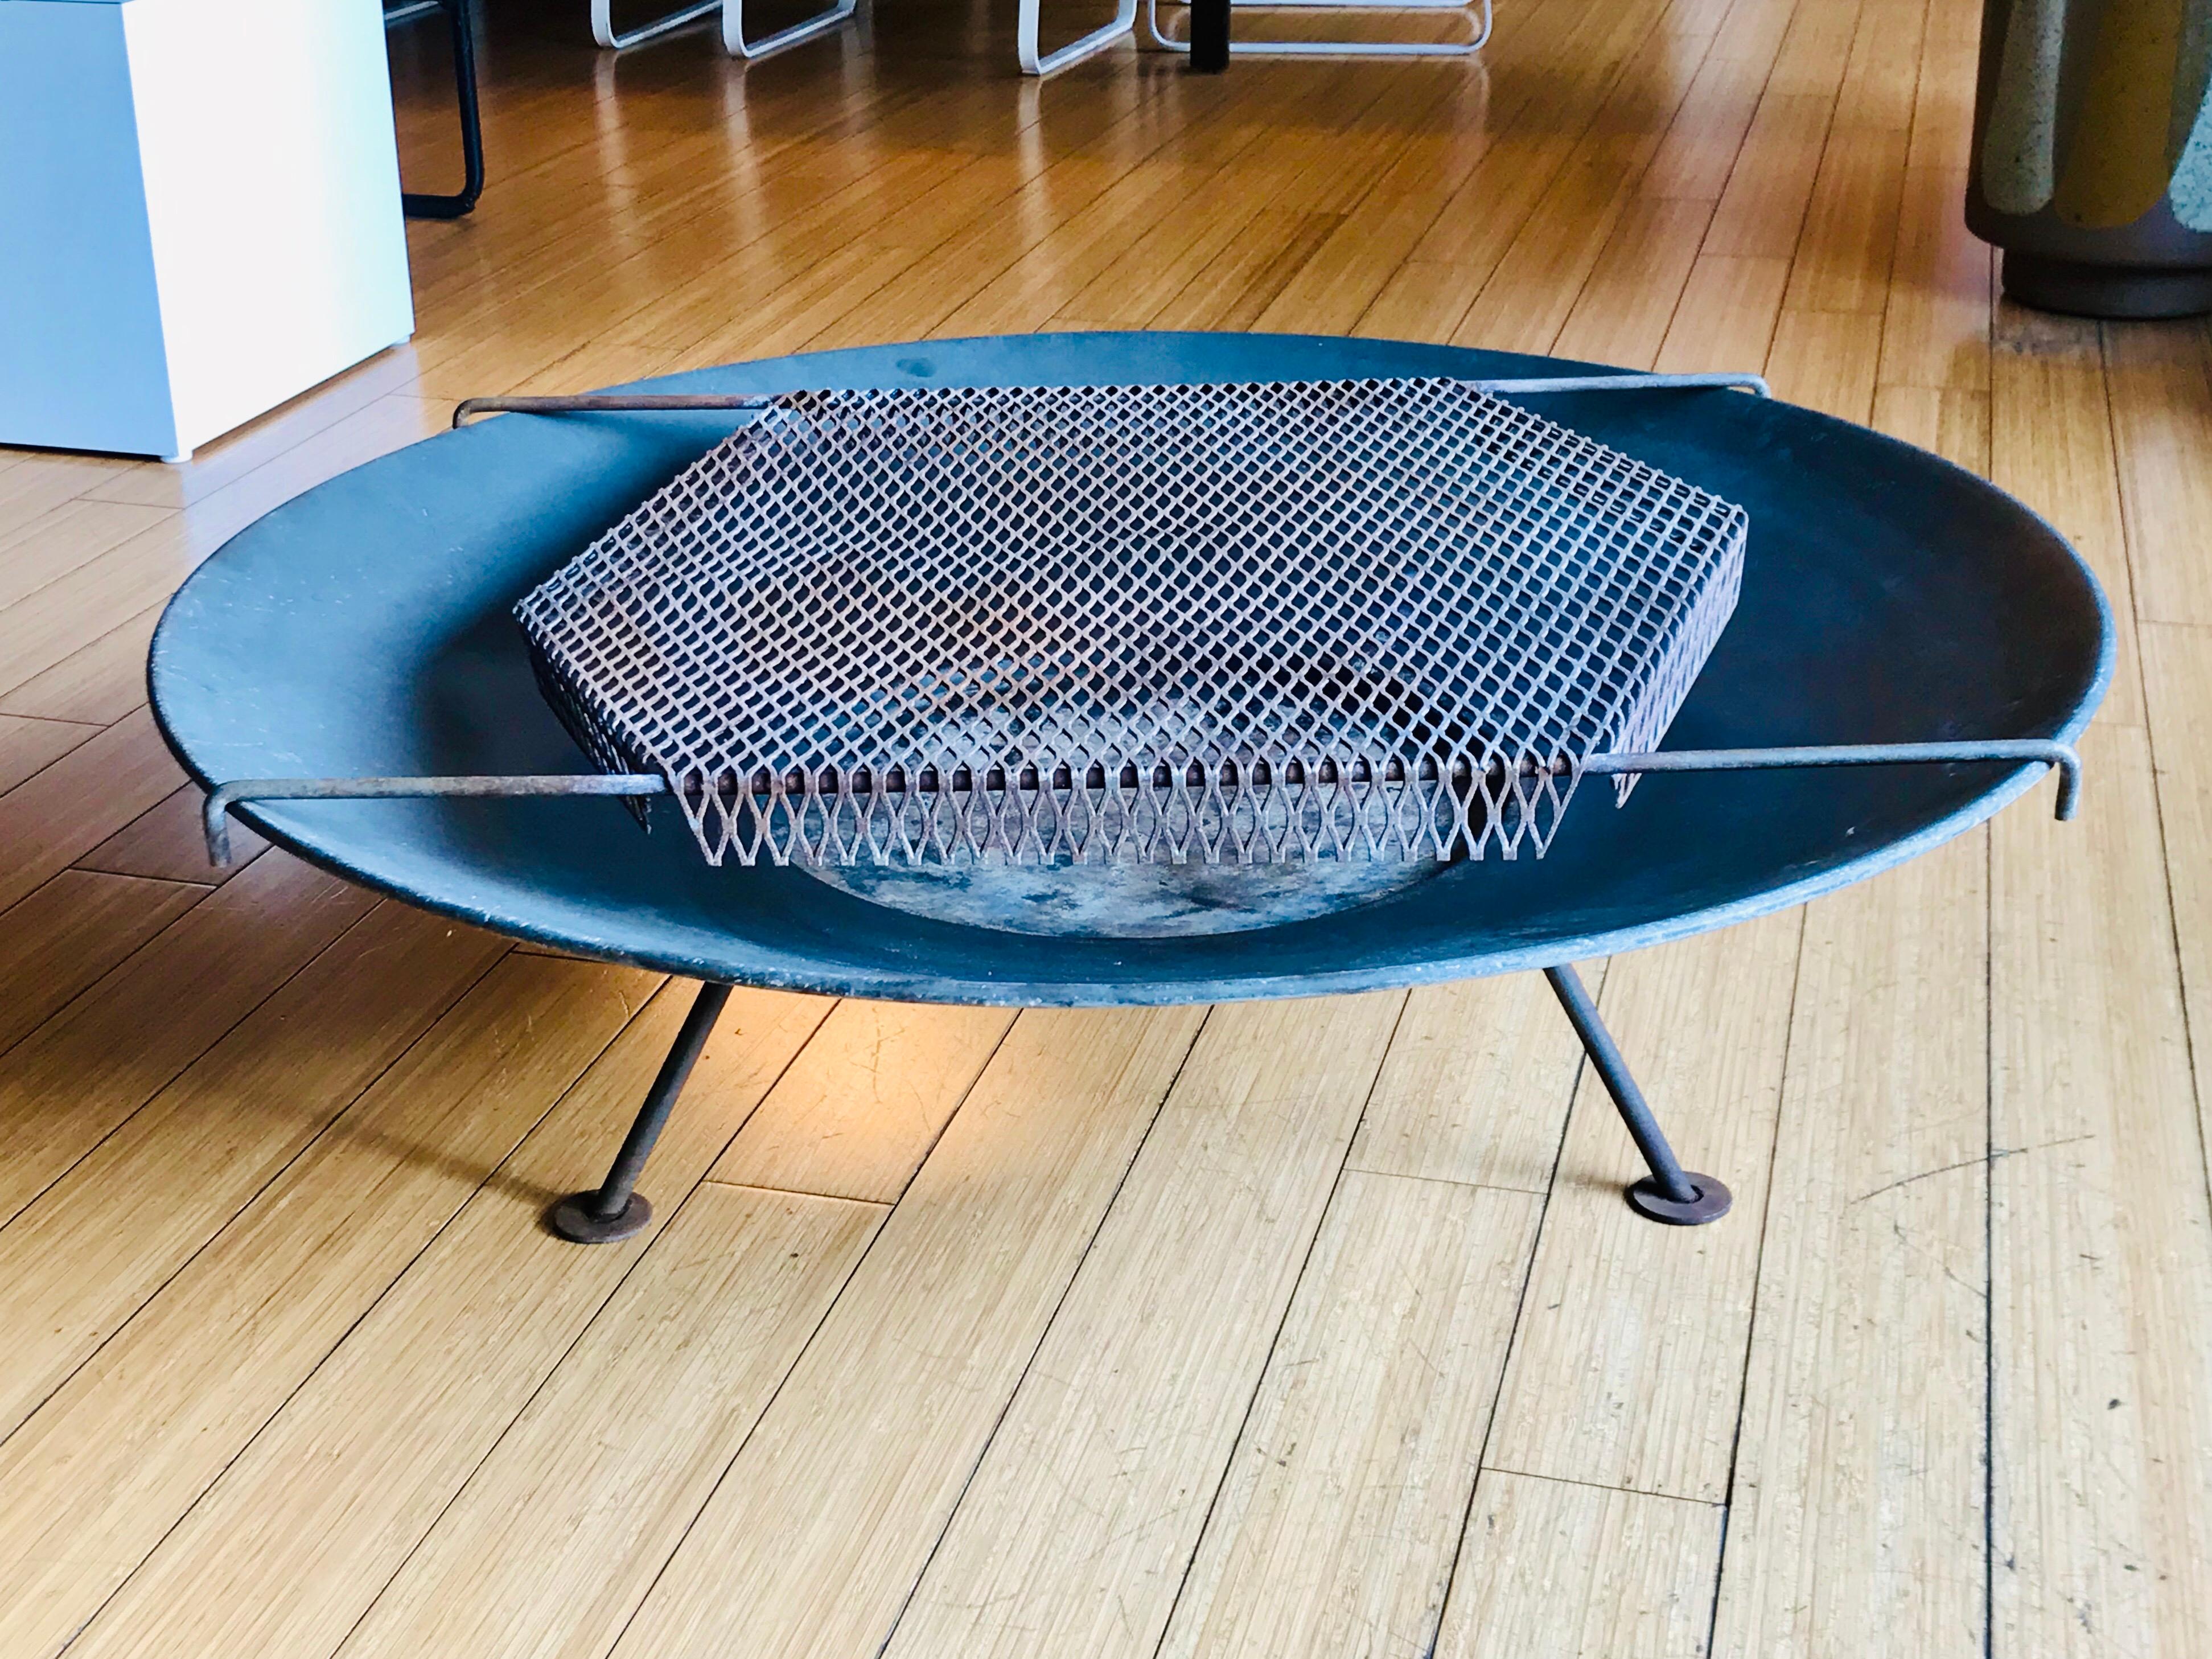 Rare design 
Form and function
Iron grill with large aluminum metal dish on tripod iron base
Original cleaned condition, no damage, normal wear / patina
Great addition for a Mid-Century Modern house paired next to Van keppel Green or Russel Woodard